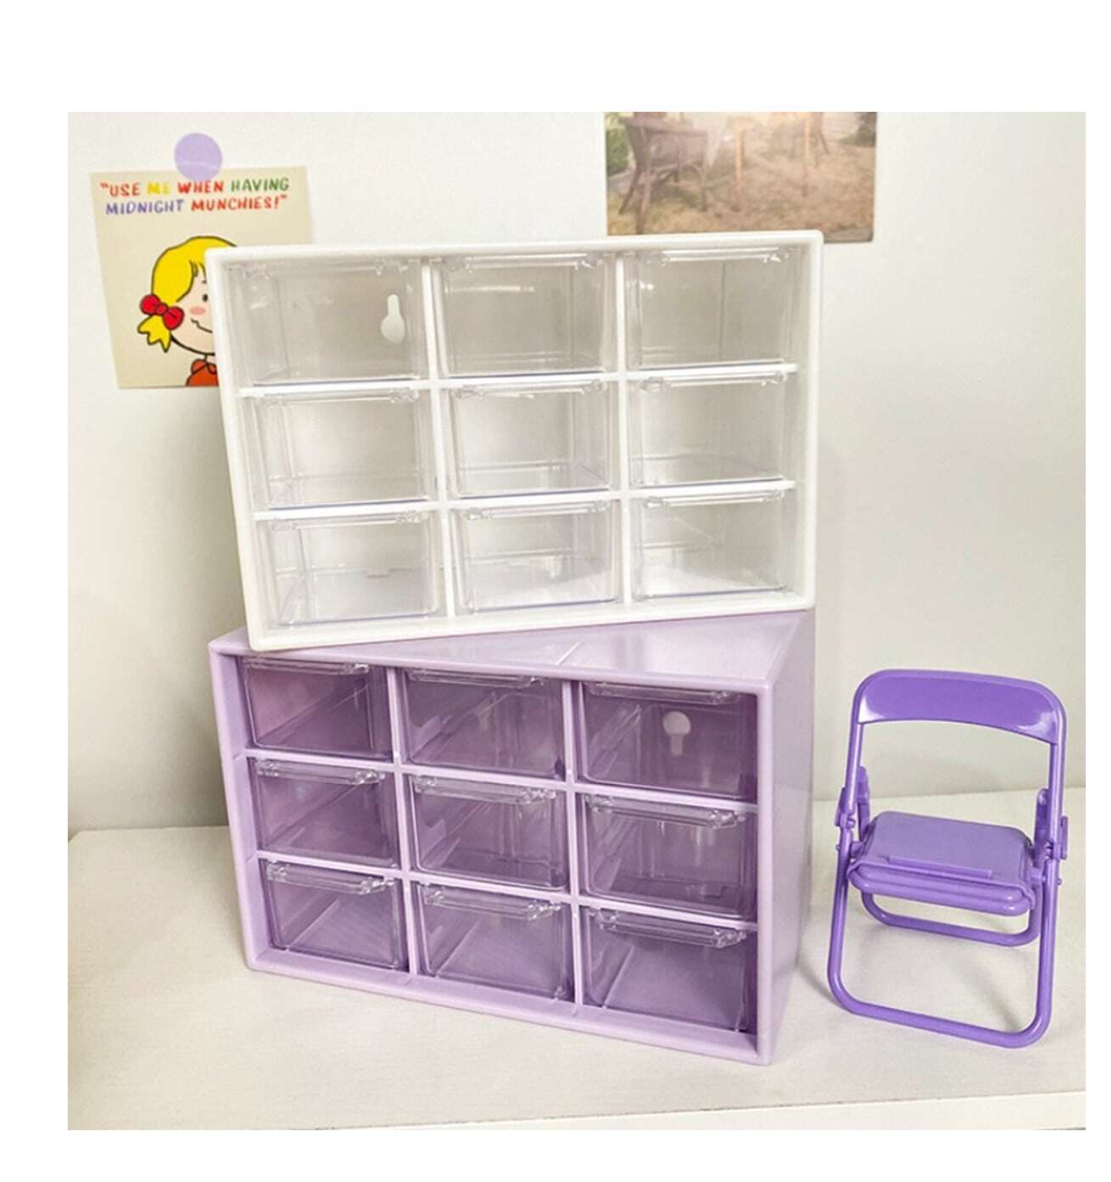 Organize with Ease: 9-Grid Transparent Desktop Storage Box - Your Compact Solution for Clutter-Free Spaces!